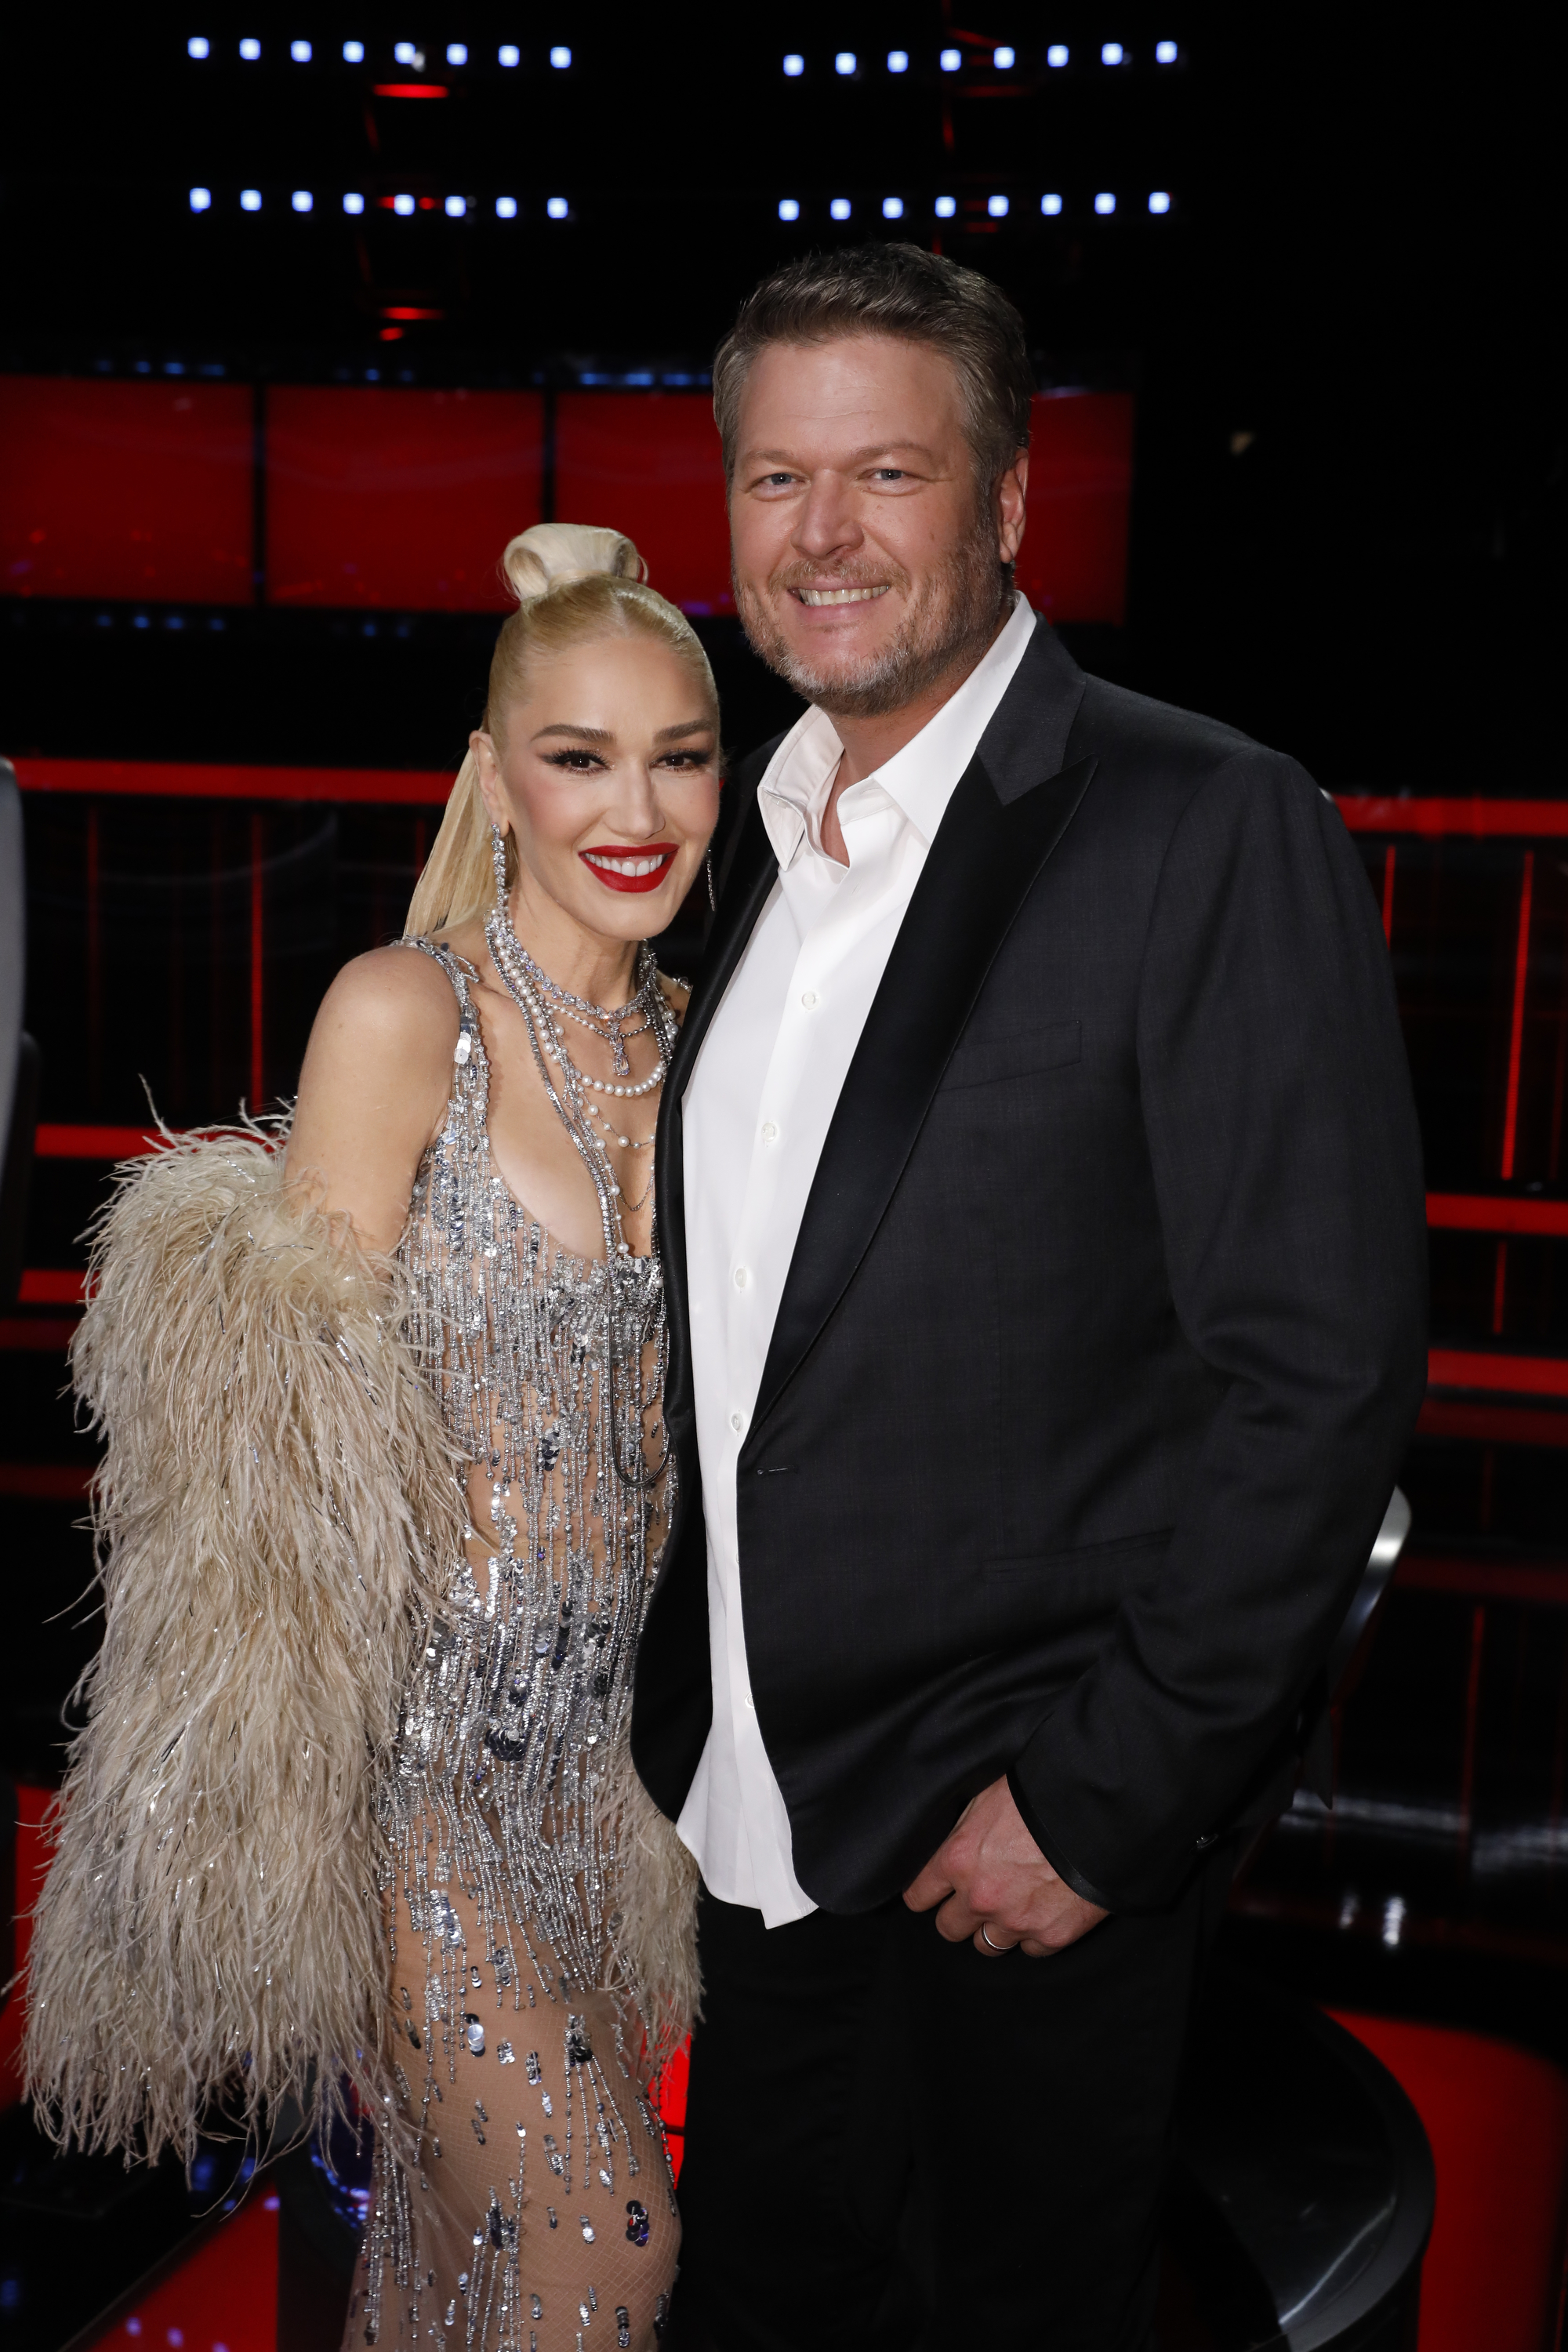 Gwen has been focusing on her beauty brand as well as her upcoming performances at Coachella and the Super Bowl